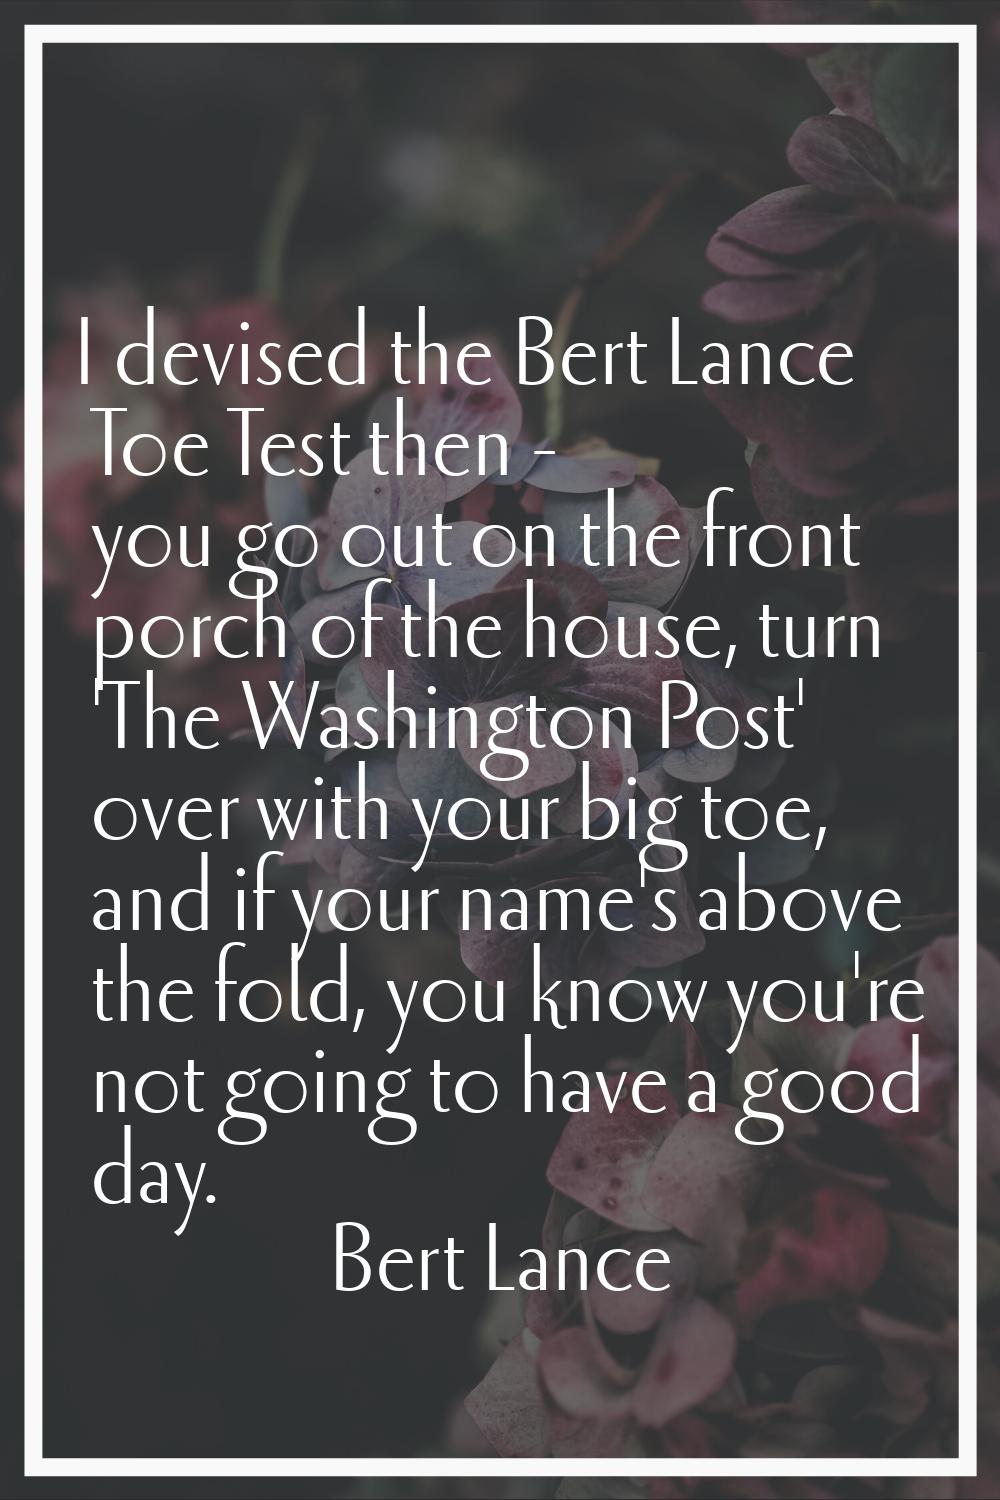 I devised the Bert Lance Toe Test then - you go out on the front porch of the house, turn 'The Wash